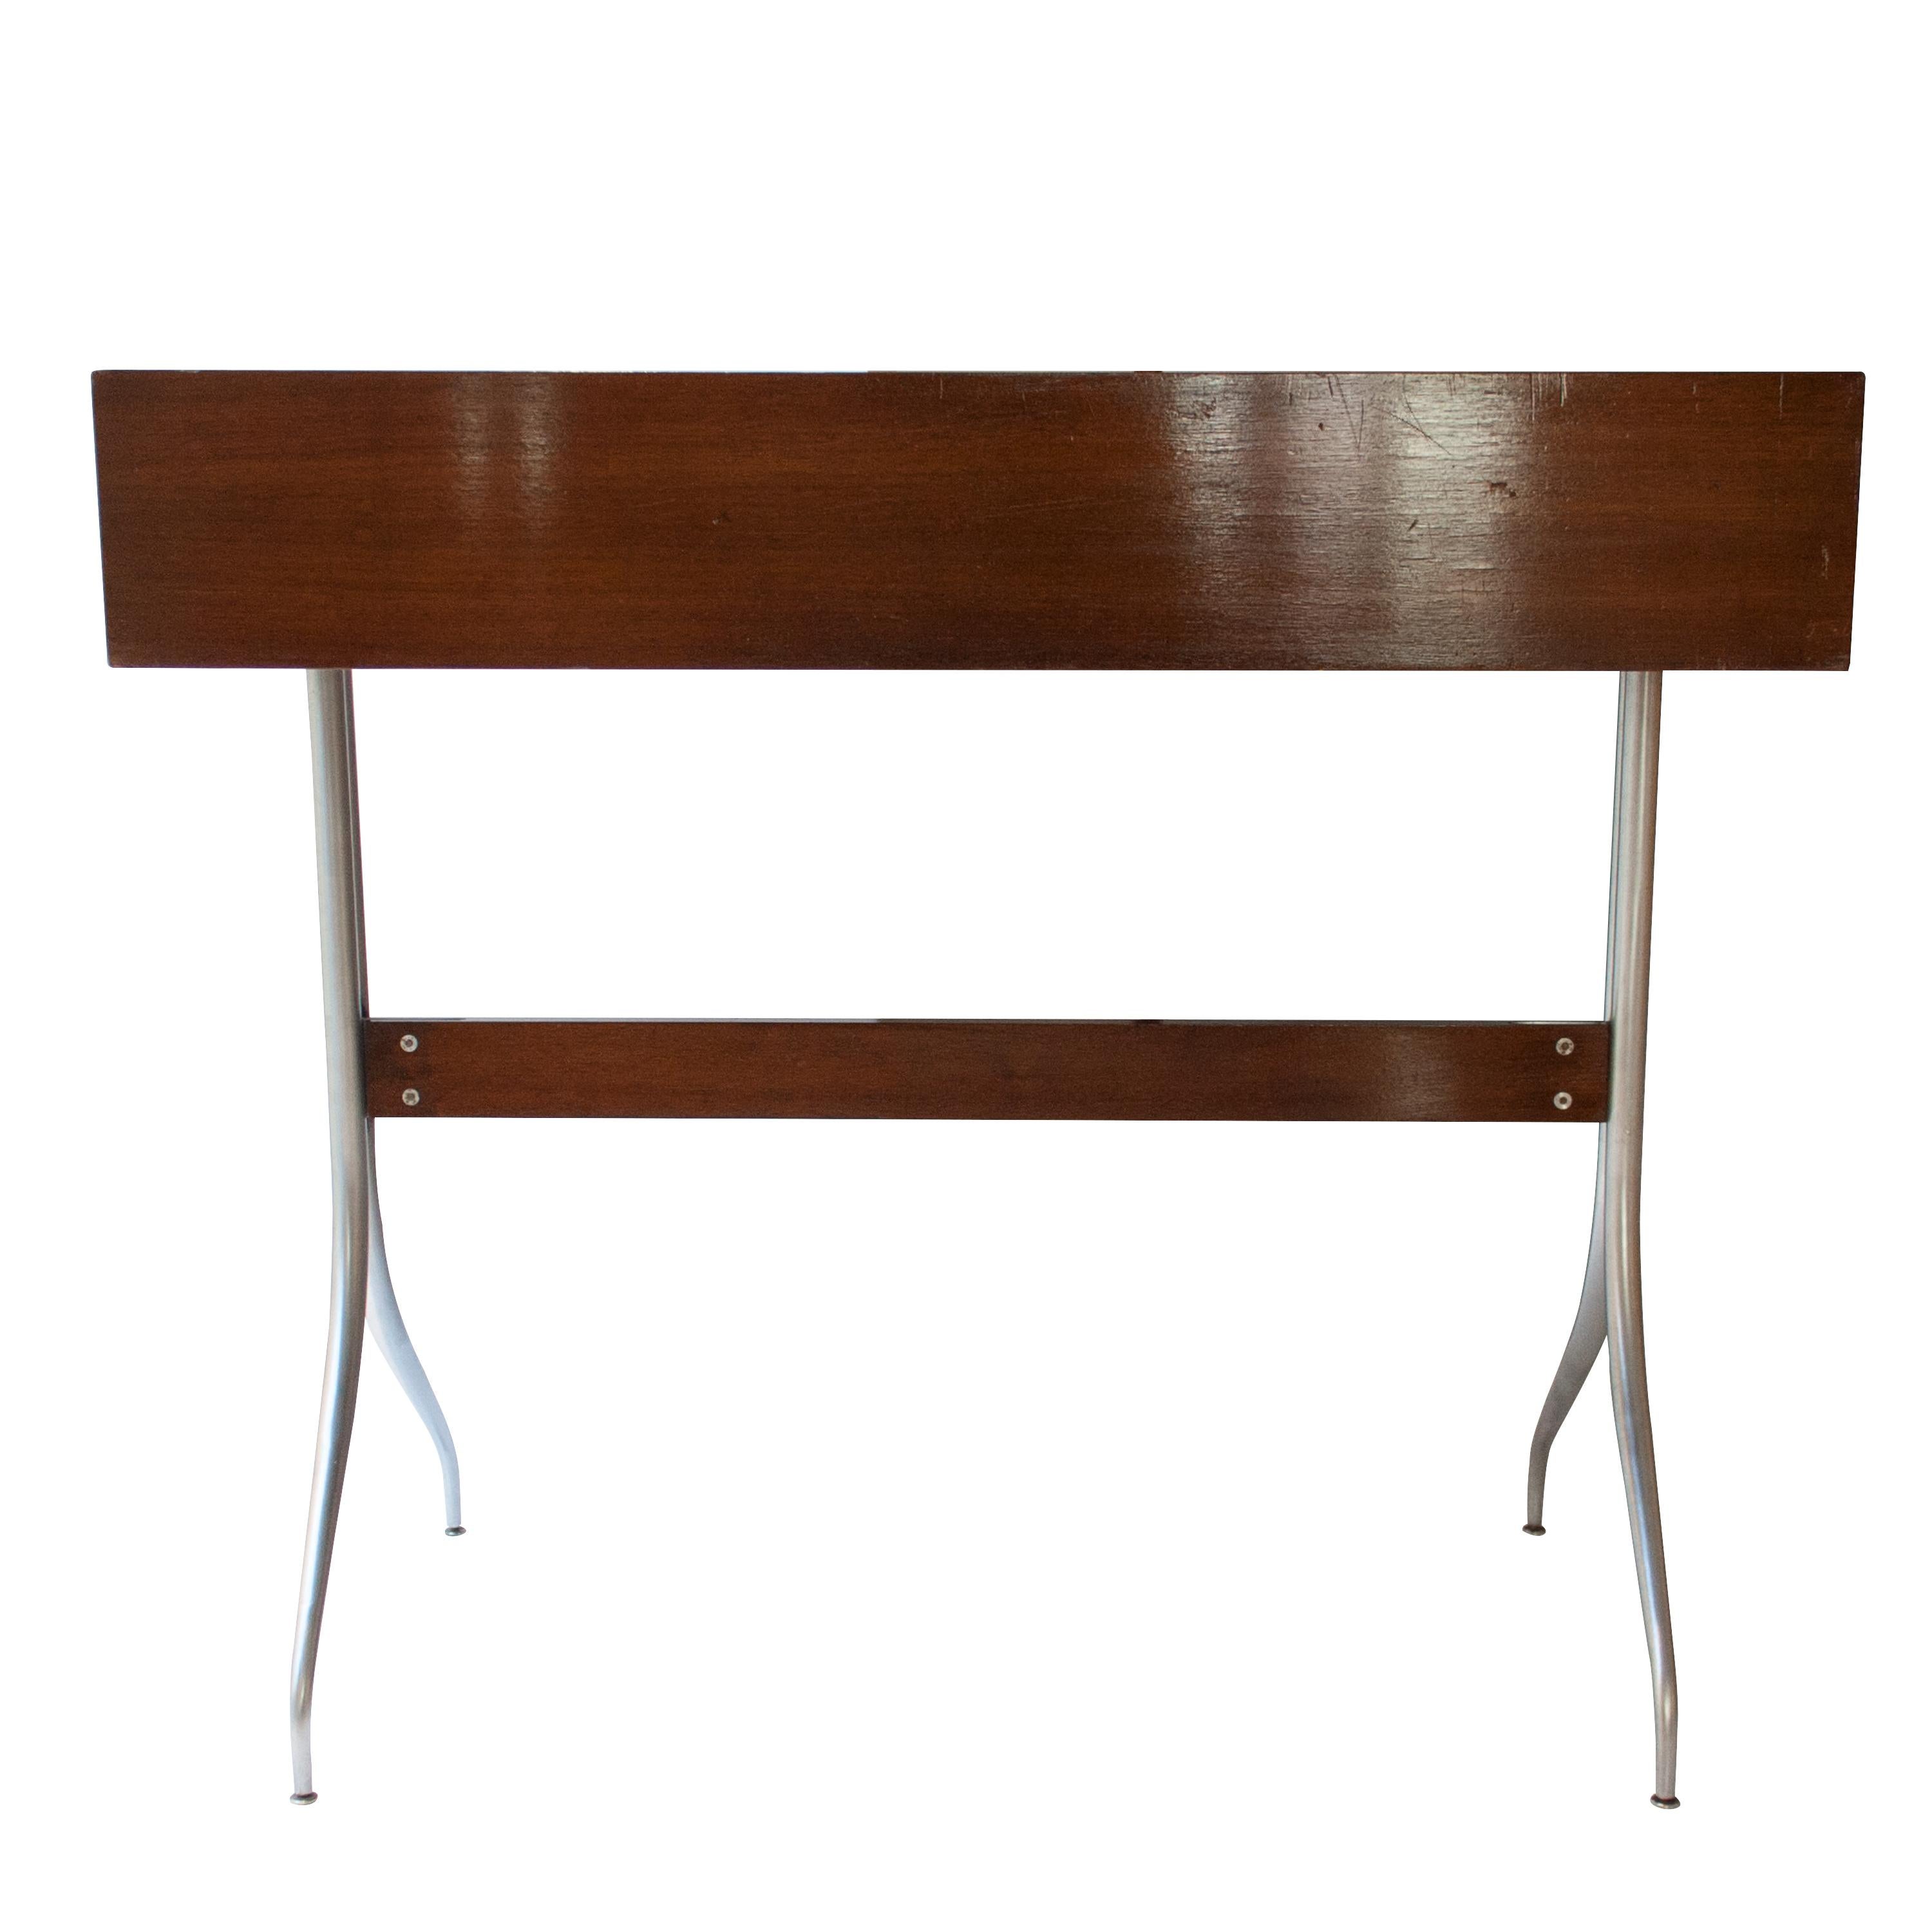 Original modern desk composed of a table with 4 compartments and 2 hidden drawers over a swag leg steel structure. Design by George Nelson for Herman Miller in the 50's.

Extra meassurents: height to desk top 76 cm and depth untill compartments